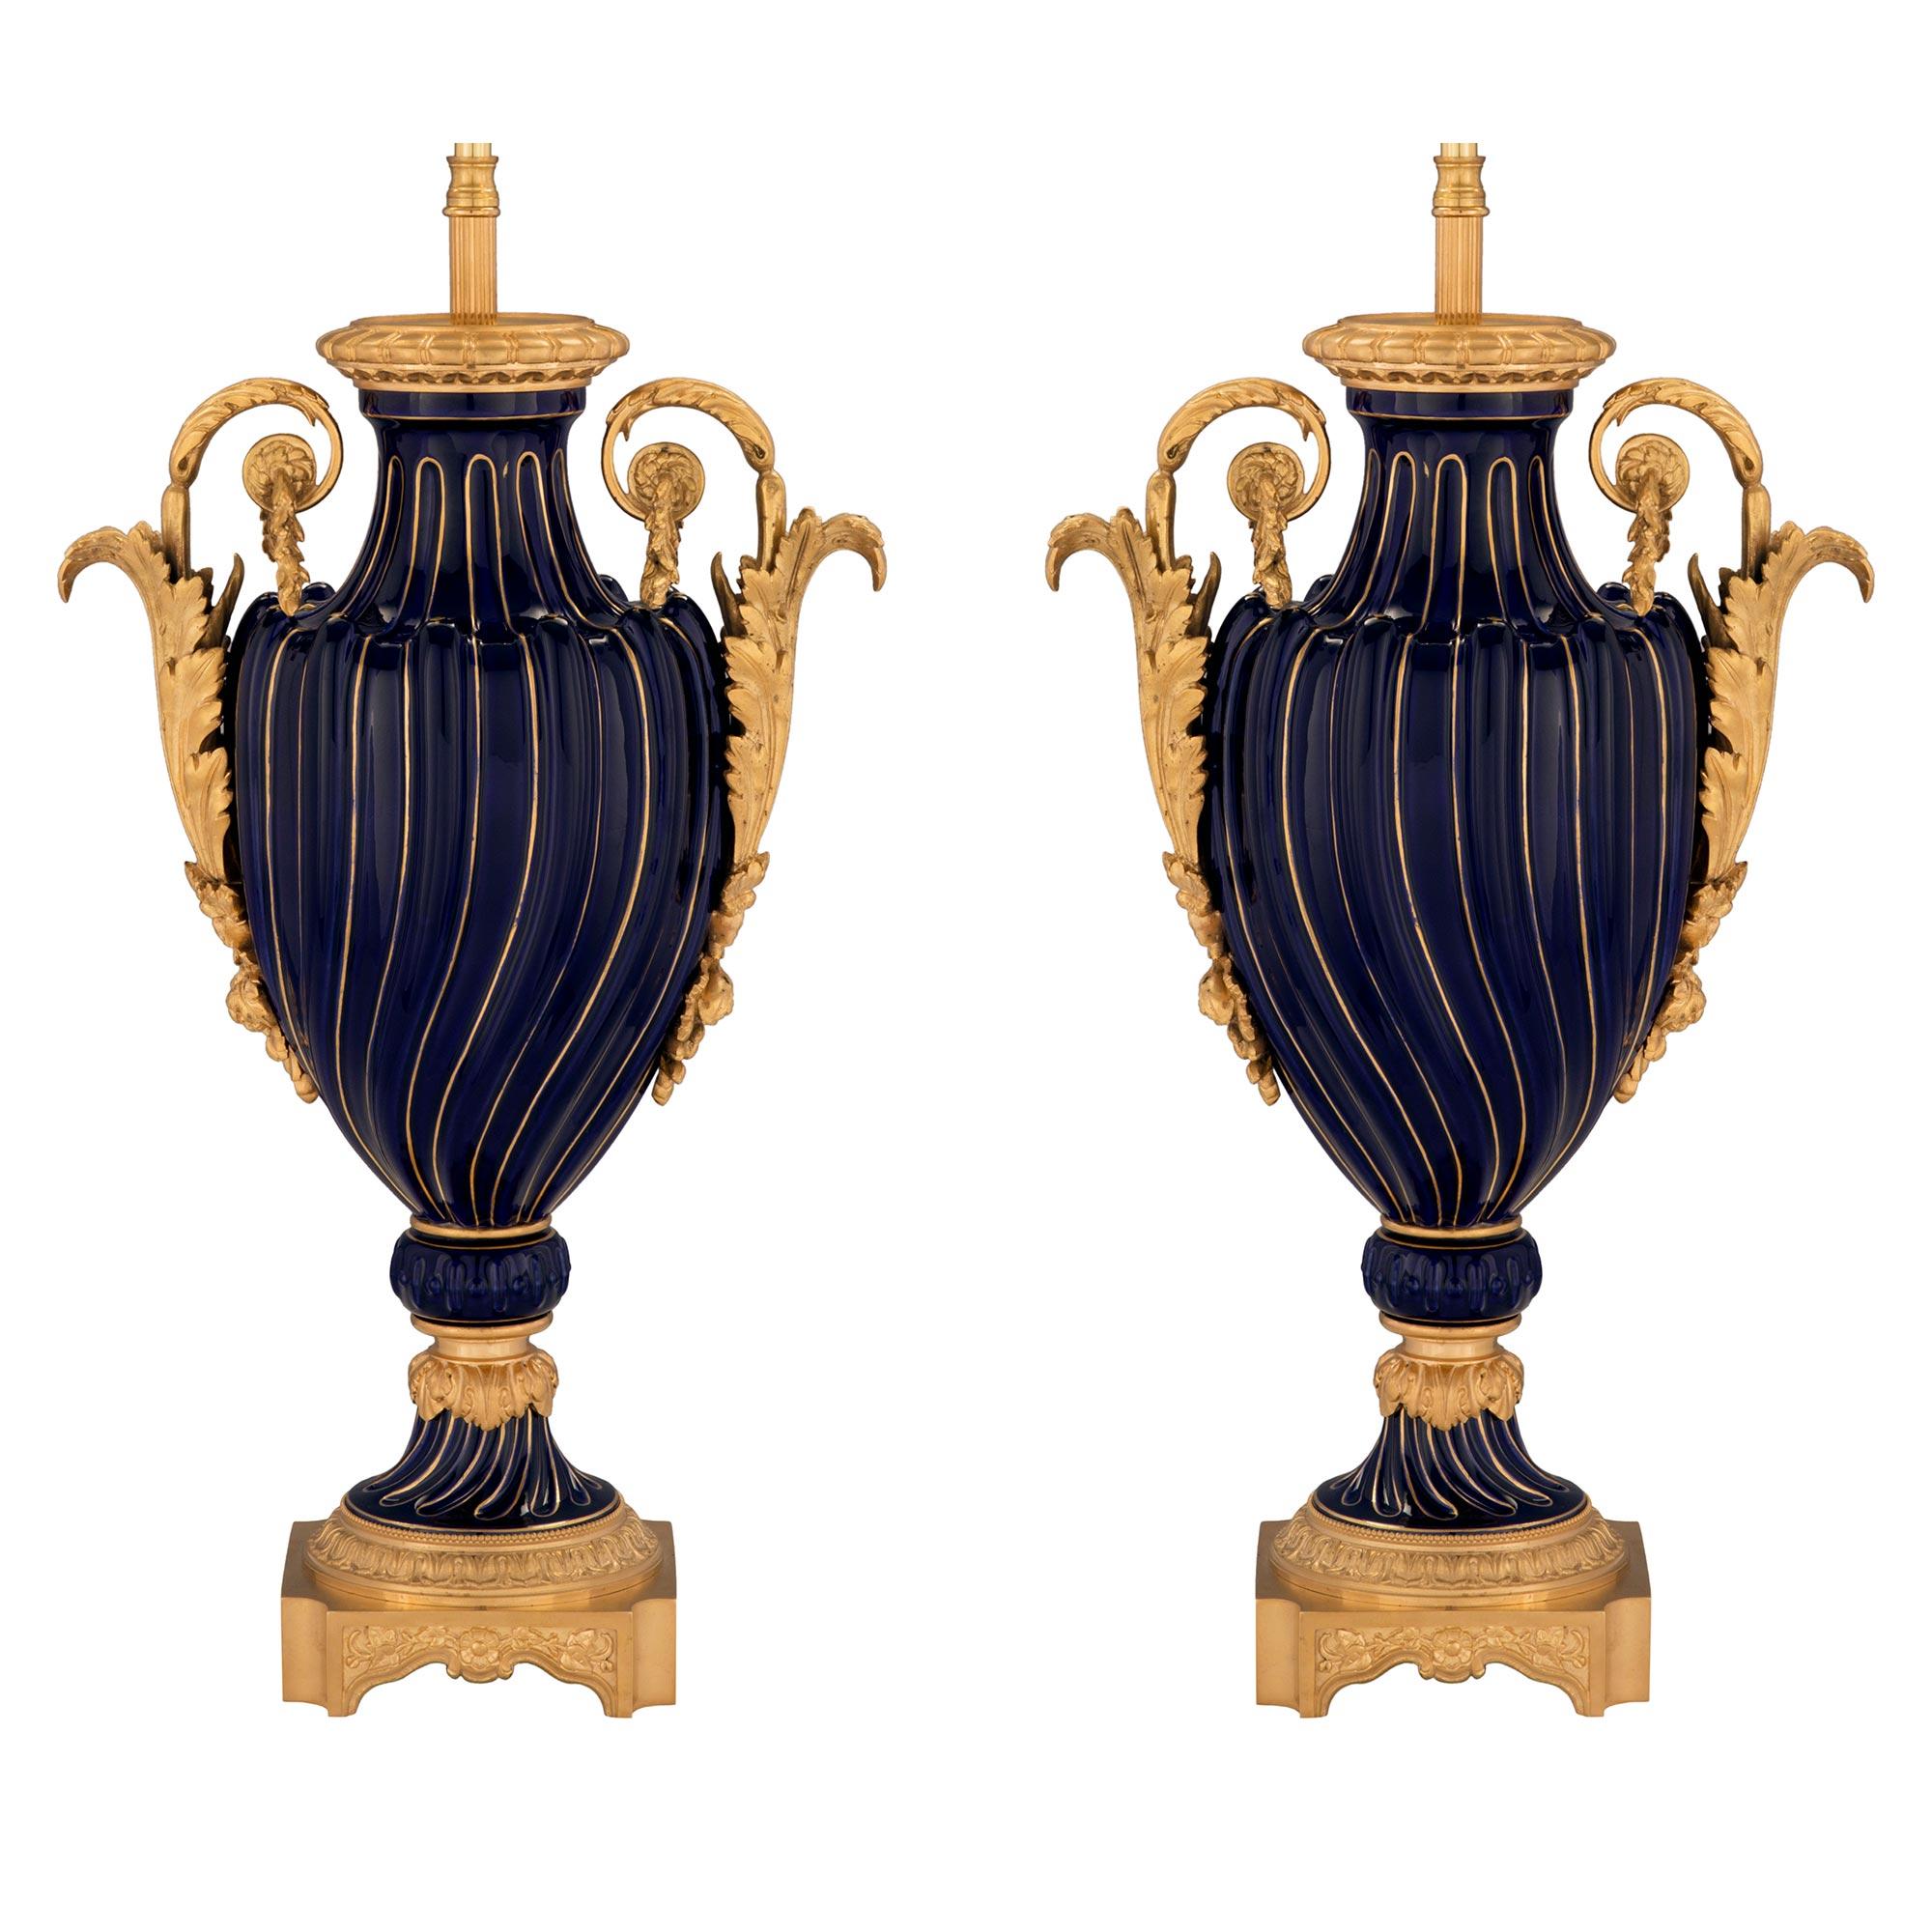 An elegant and high quality pair of French 19th century cobalt blue Sèvres porcelain and ormolu mounted lamps. Each lamp is raised by a fine square ormolu base with concave corners and charming foliate movements below an egg and dart ormolu pattern.